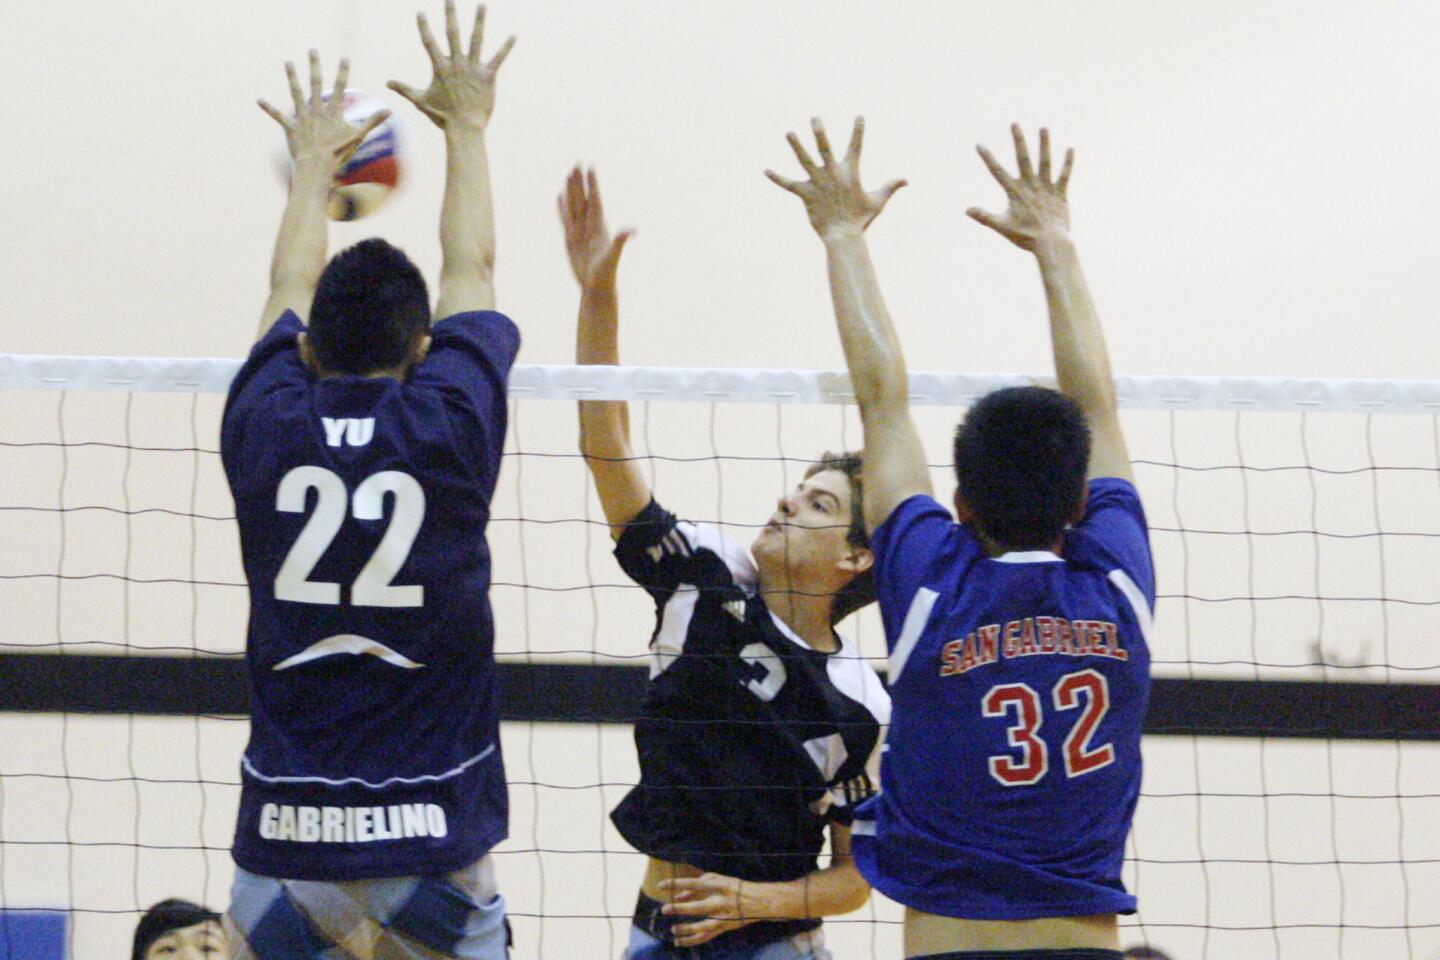 St. Francis' Charles McCarthy, center, spikes the ball during a volleyball match against public schools, which took place at Caltech in Pasadena on Saturday, June 9, 2012.